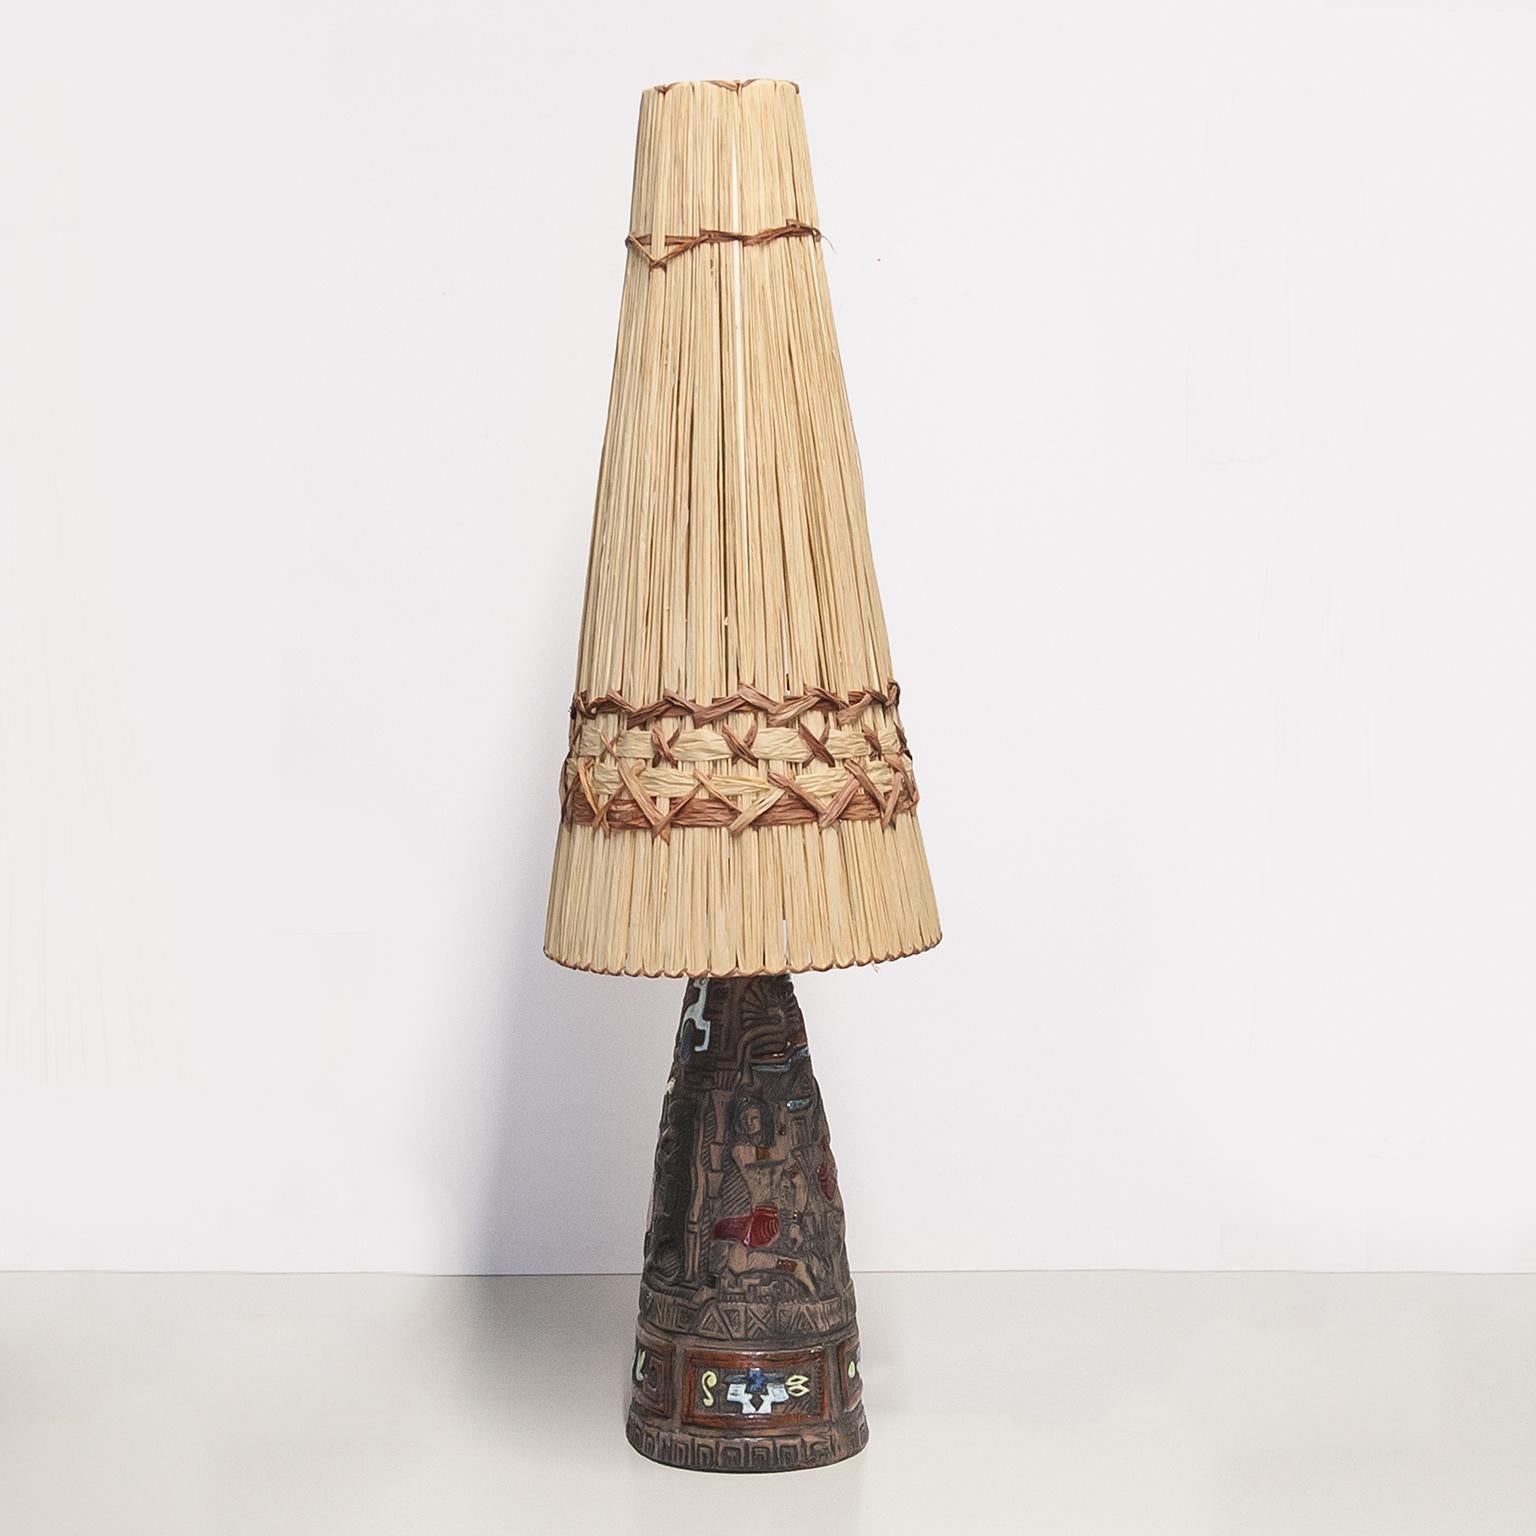 Very beautiful Tiki ceramic table lamp executed in Hawaiian South Sea Style and an original raffia shade, made in the 1950s by Tilgmans Sweden, excellent vintage condition.